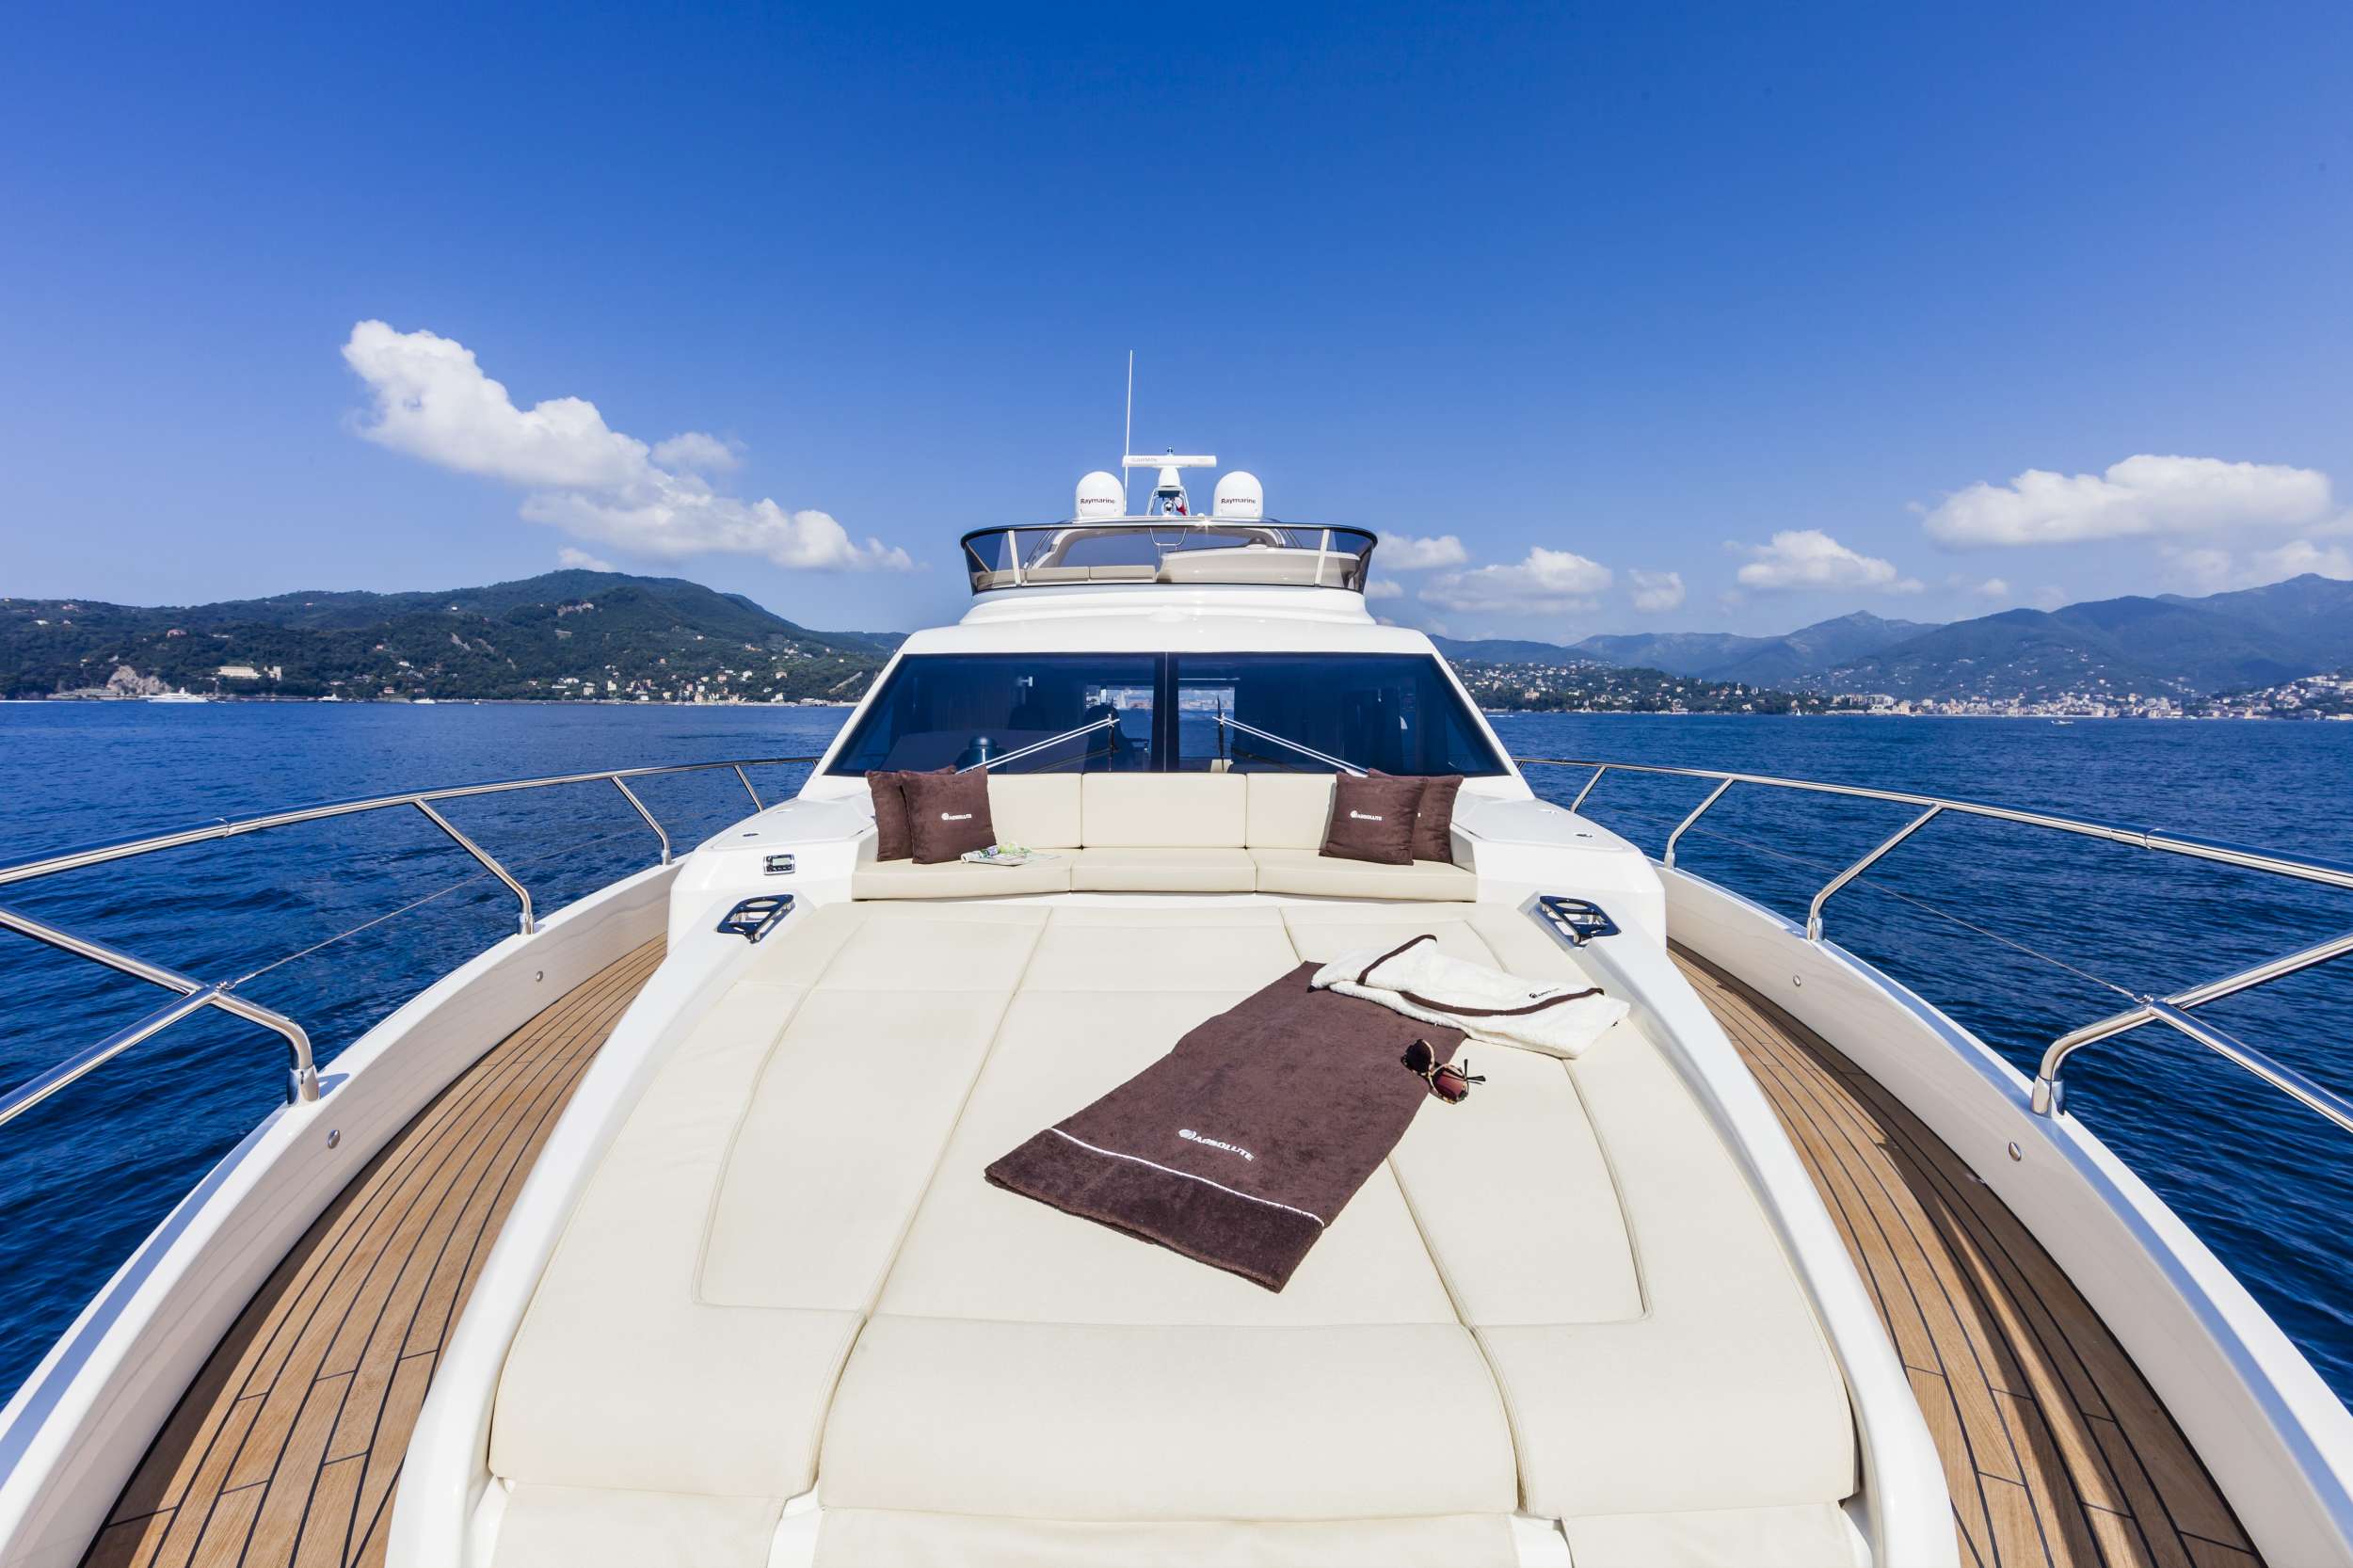 ABSOLUTE - Yacht Charter Antibes & Boat hire in Fr. Riviera, Corsica & Sardinia 4